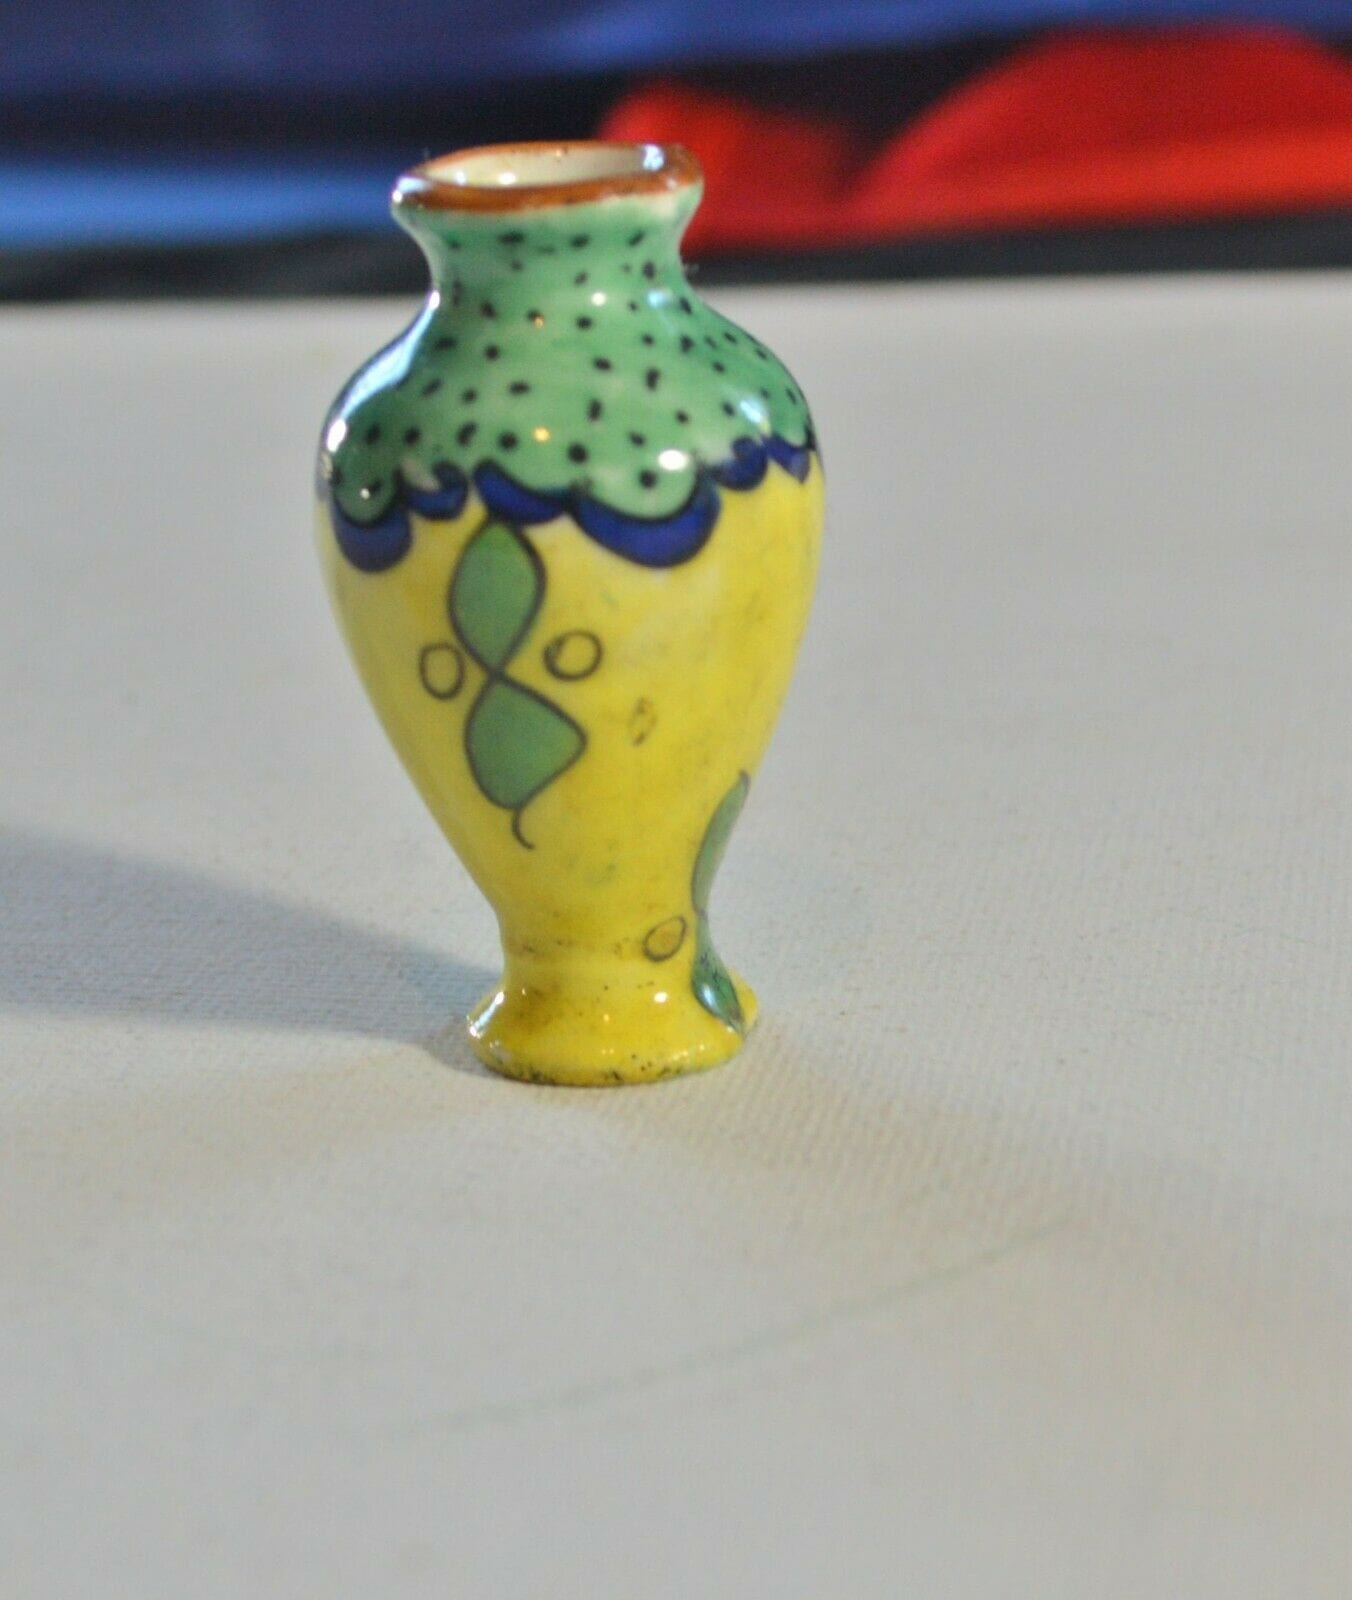 MINIATURE VASE AND MINIATURE CHAMBER POT(PREVIOUSLY OWNED) GOOD CONDITION - TMD167207